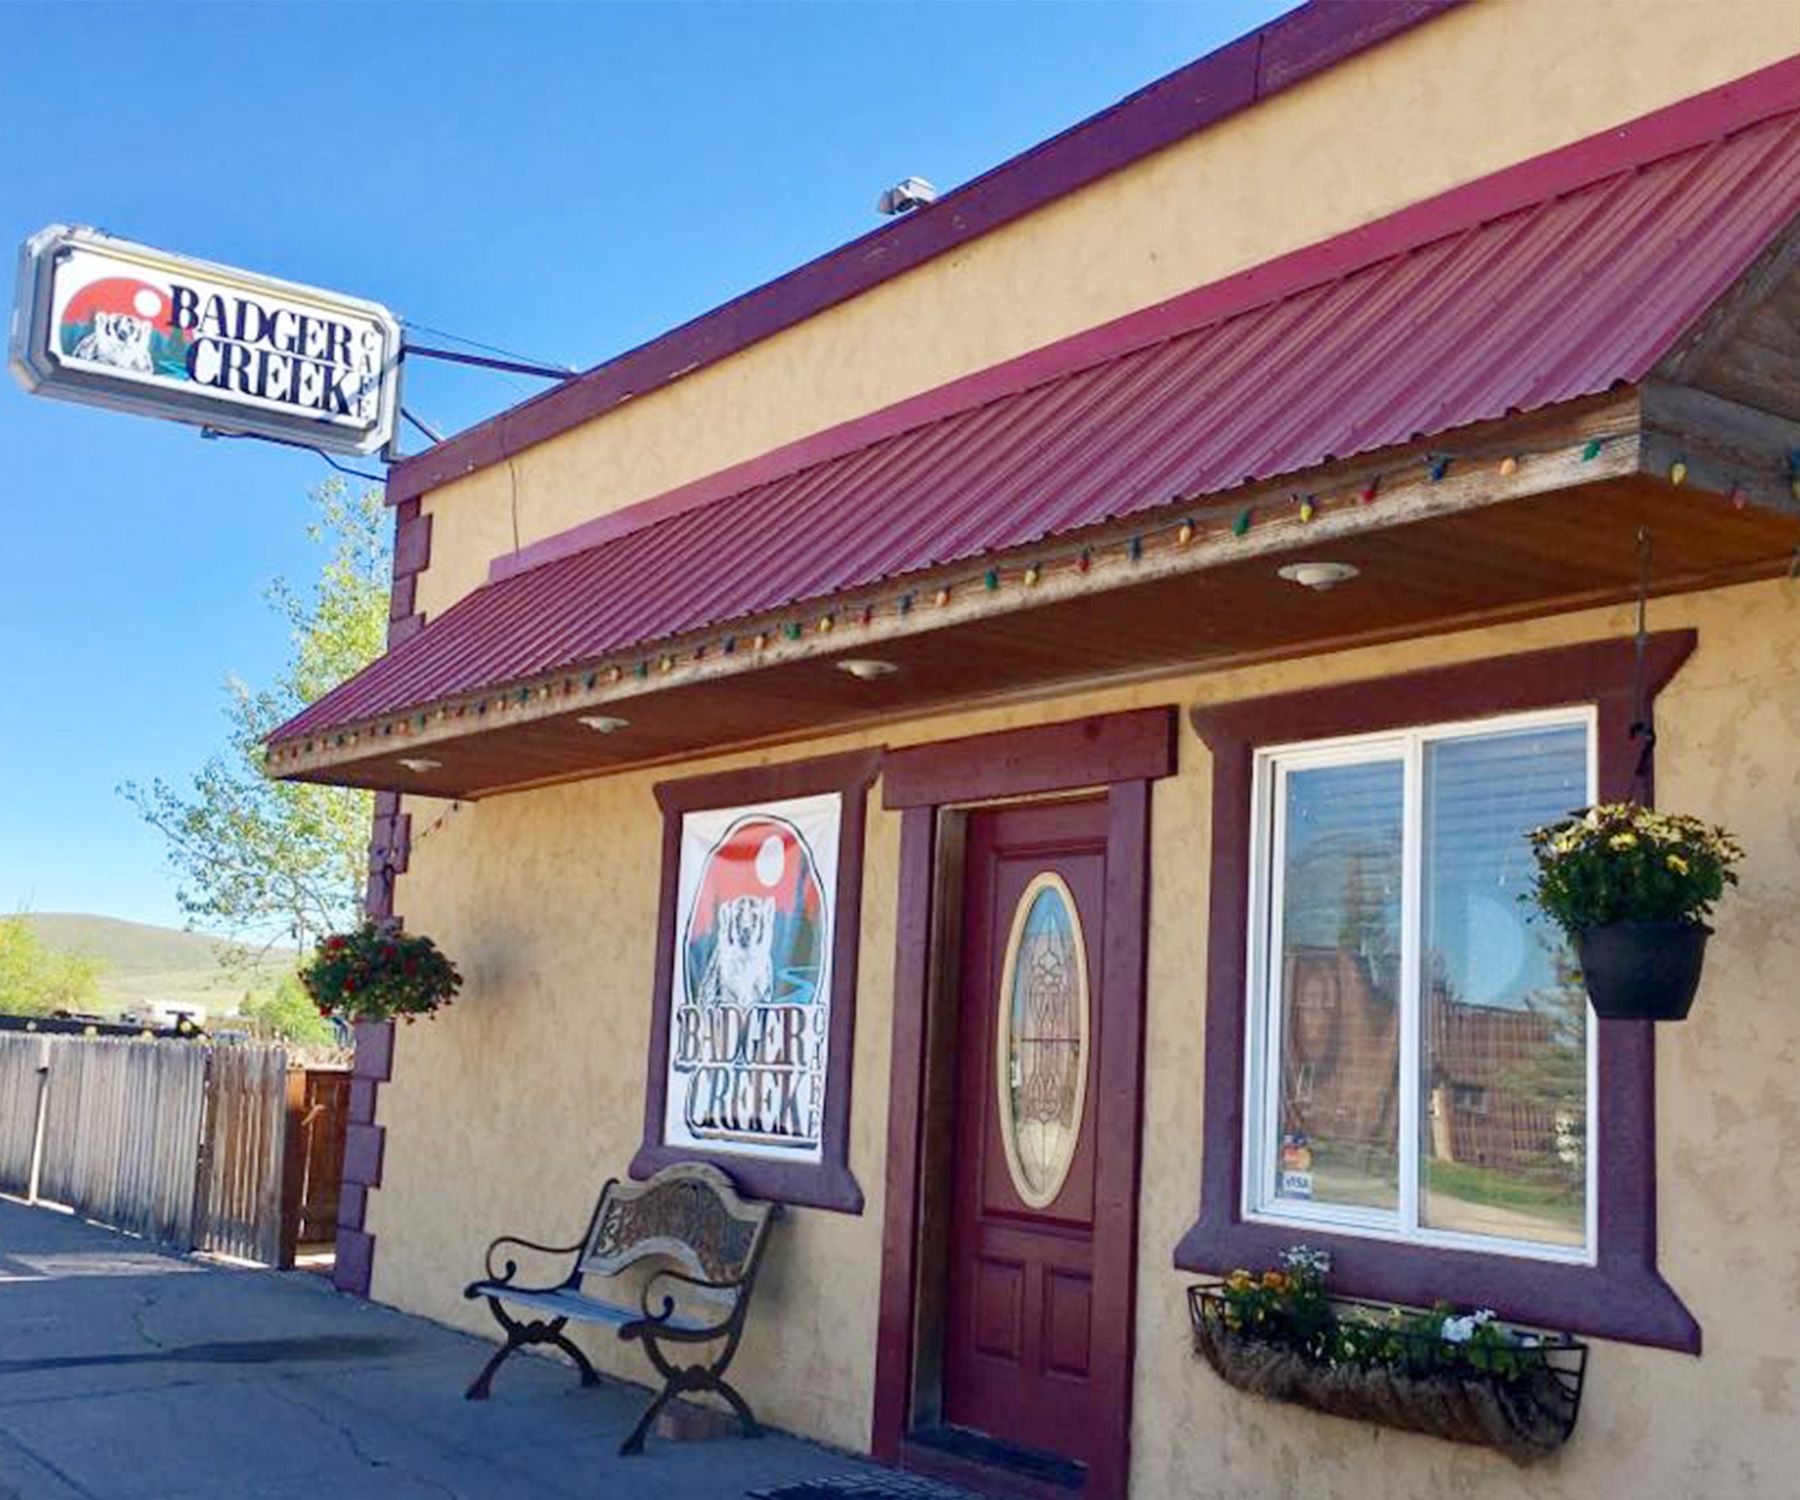 Badger Creek Cafe: Where Culinary Passion Meets Community Love